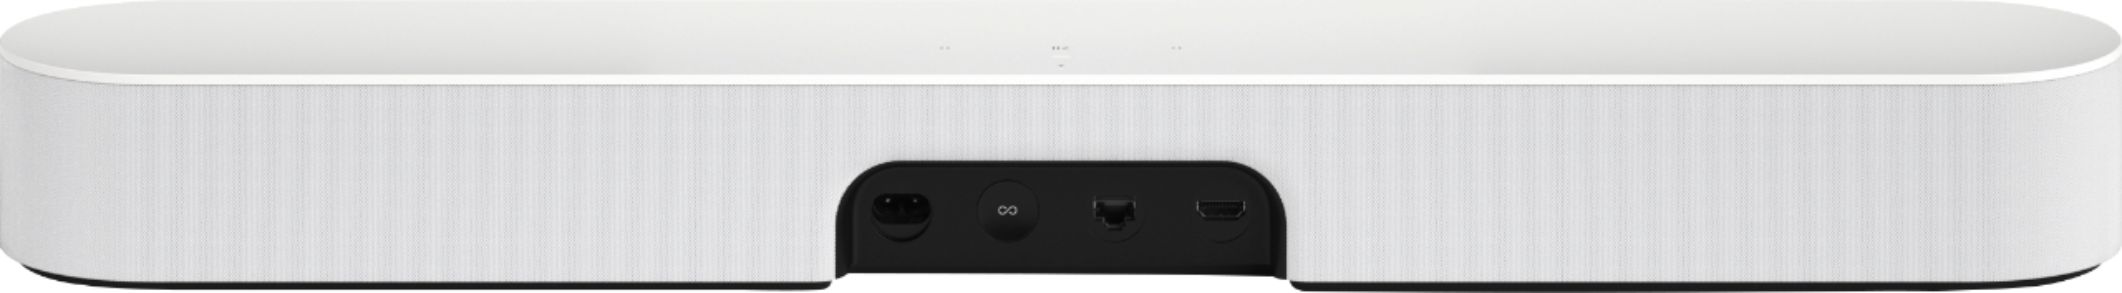 Back View: Sonos - Long Straight Power Cable for Five, Beam, and Amp - Black